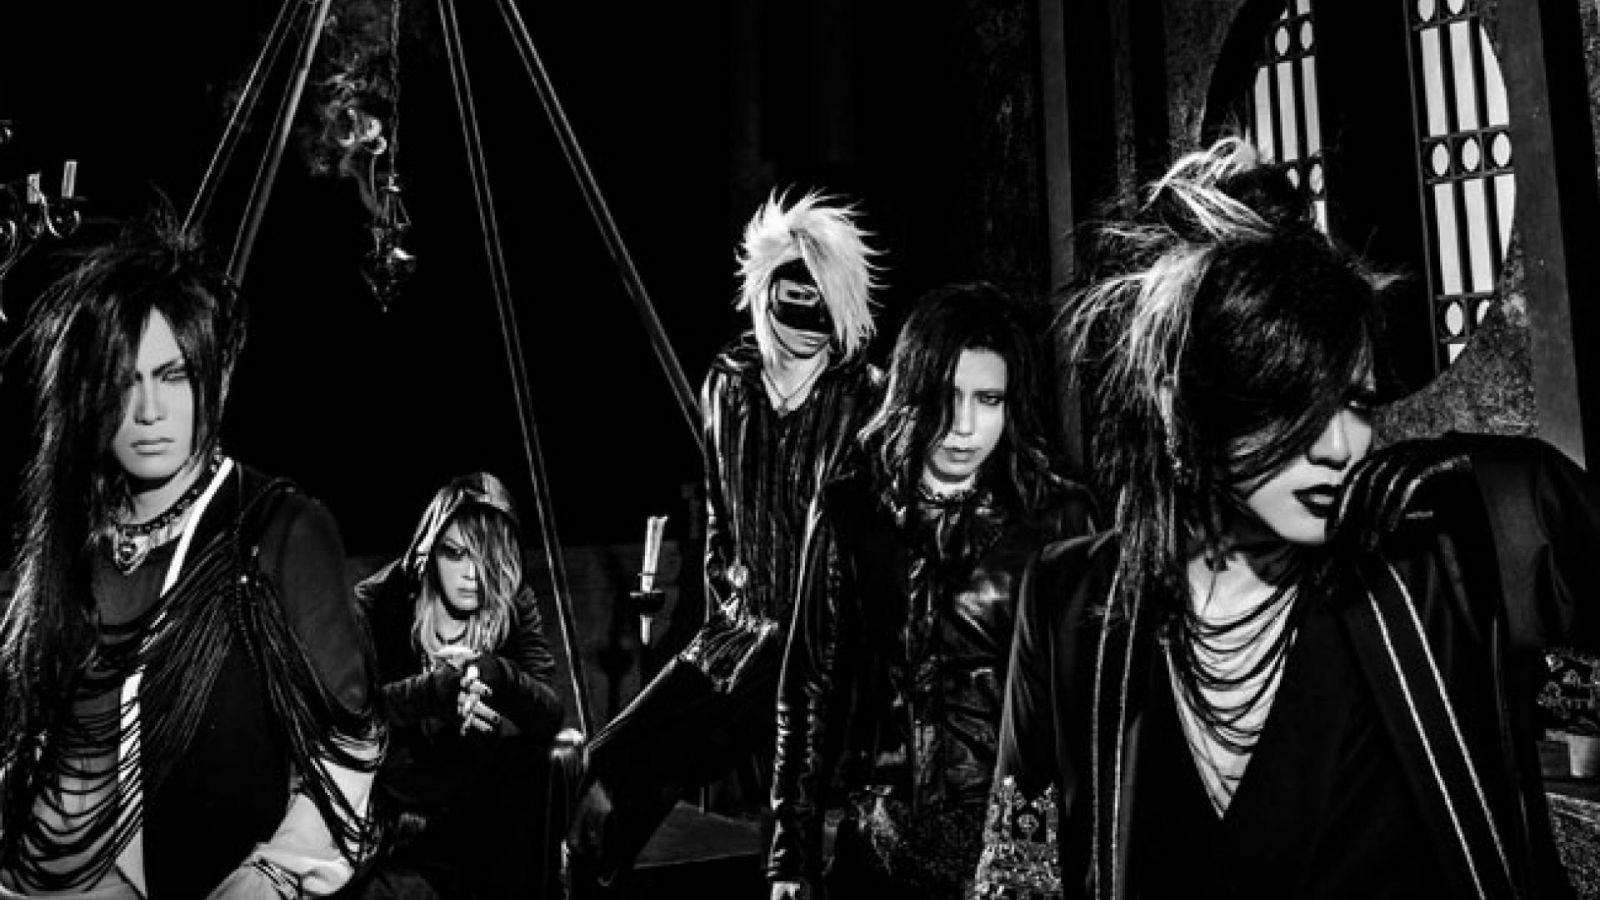 the GazettE to Release DOGMA in the UK and Europe © 2015 PS COMPANY. Provided by JPU Records.